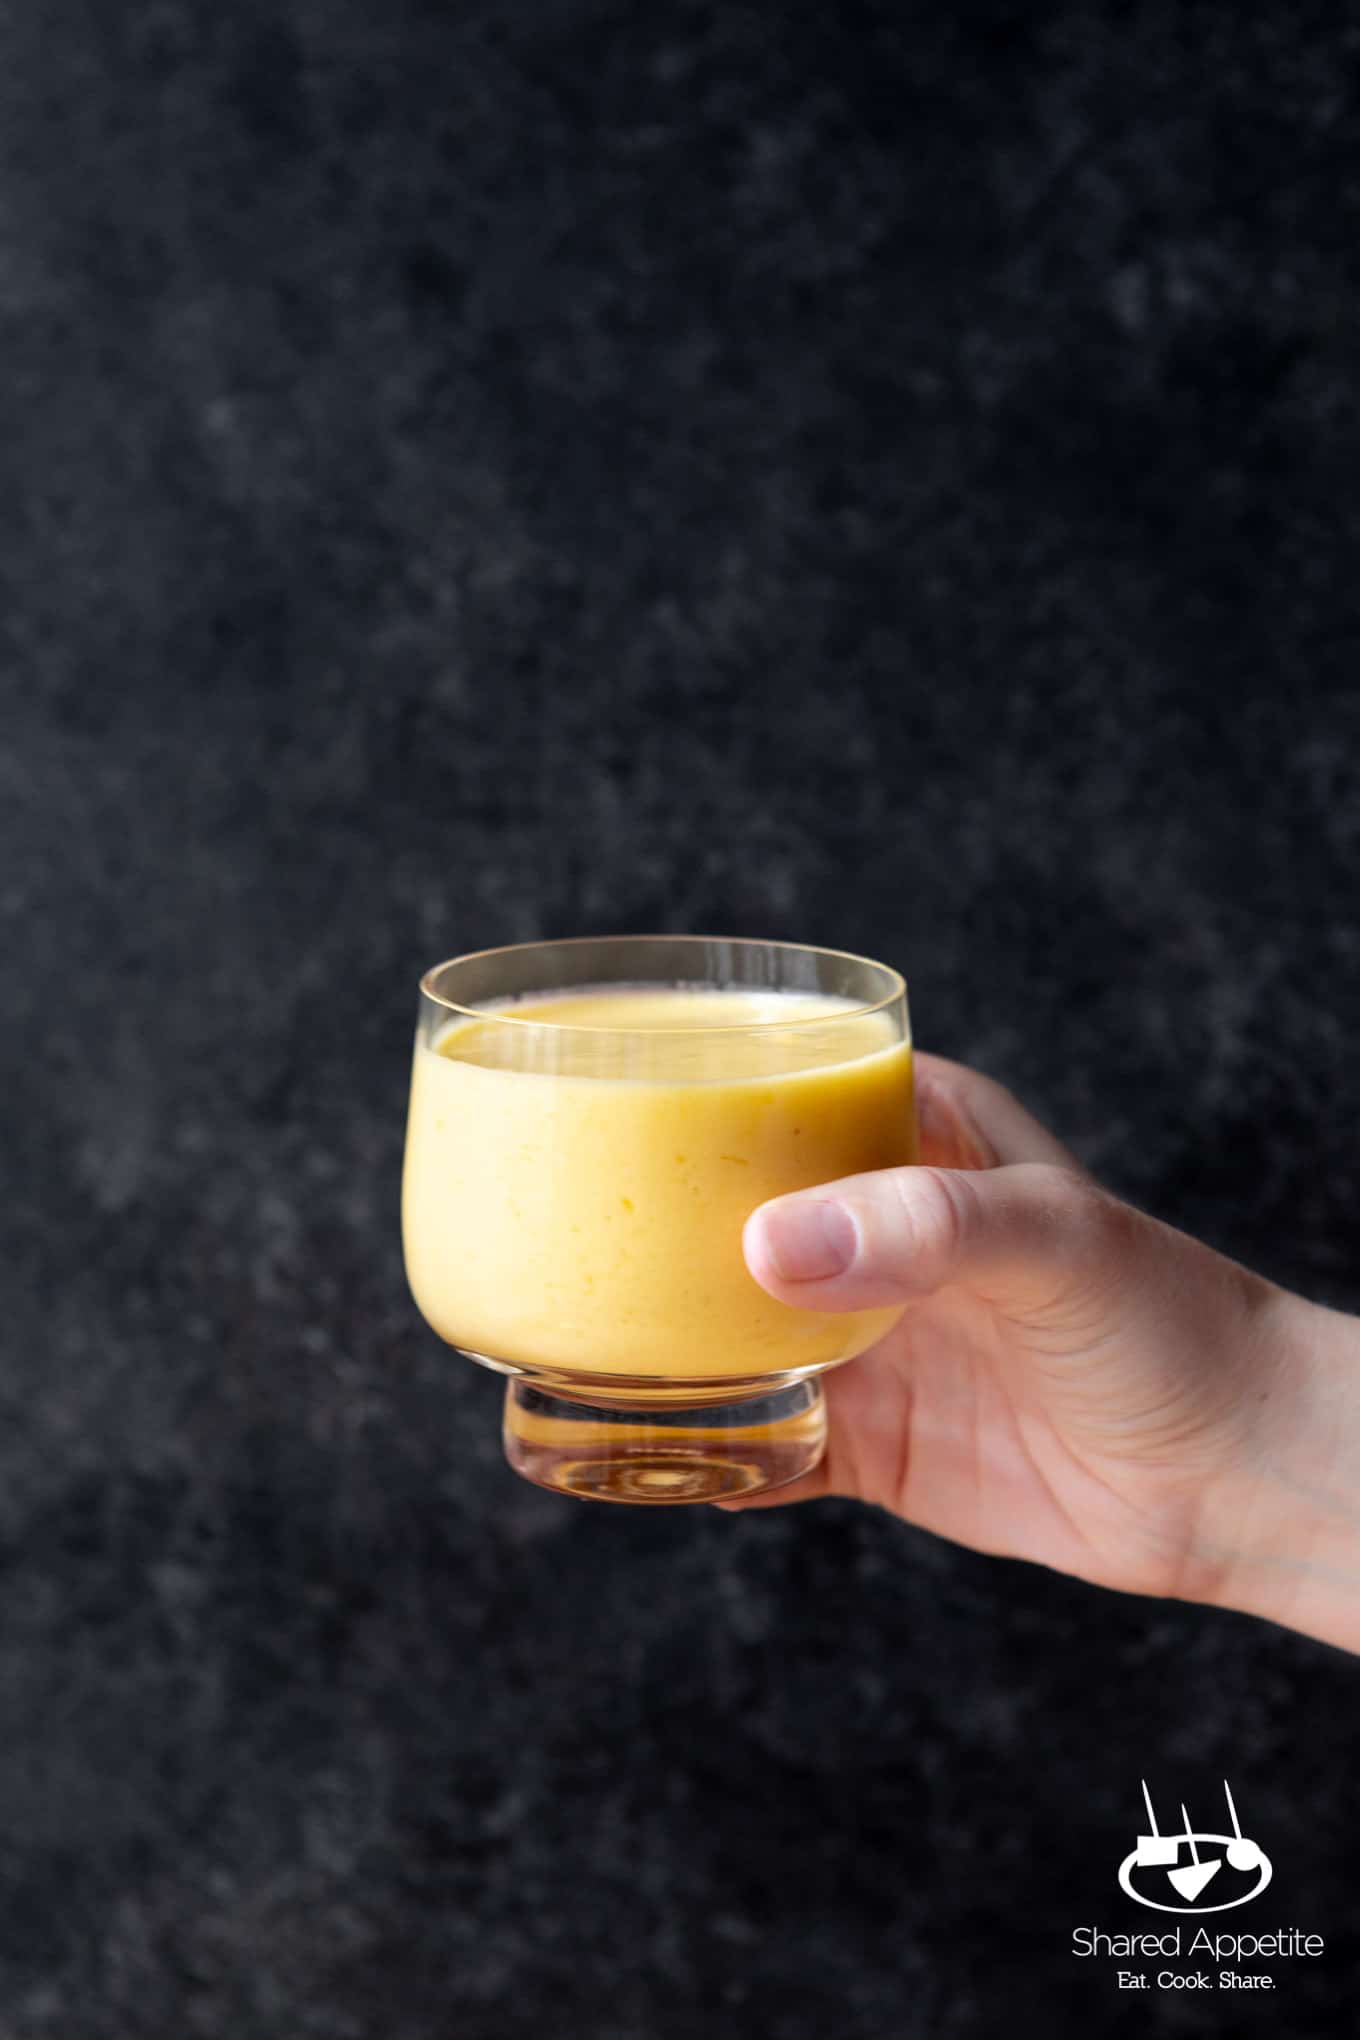 How to Make Quick and Easy Four Ingredient Mango Lassi